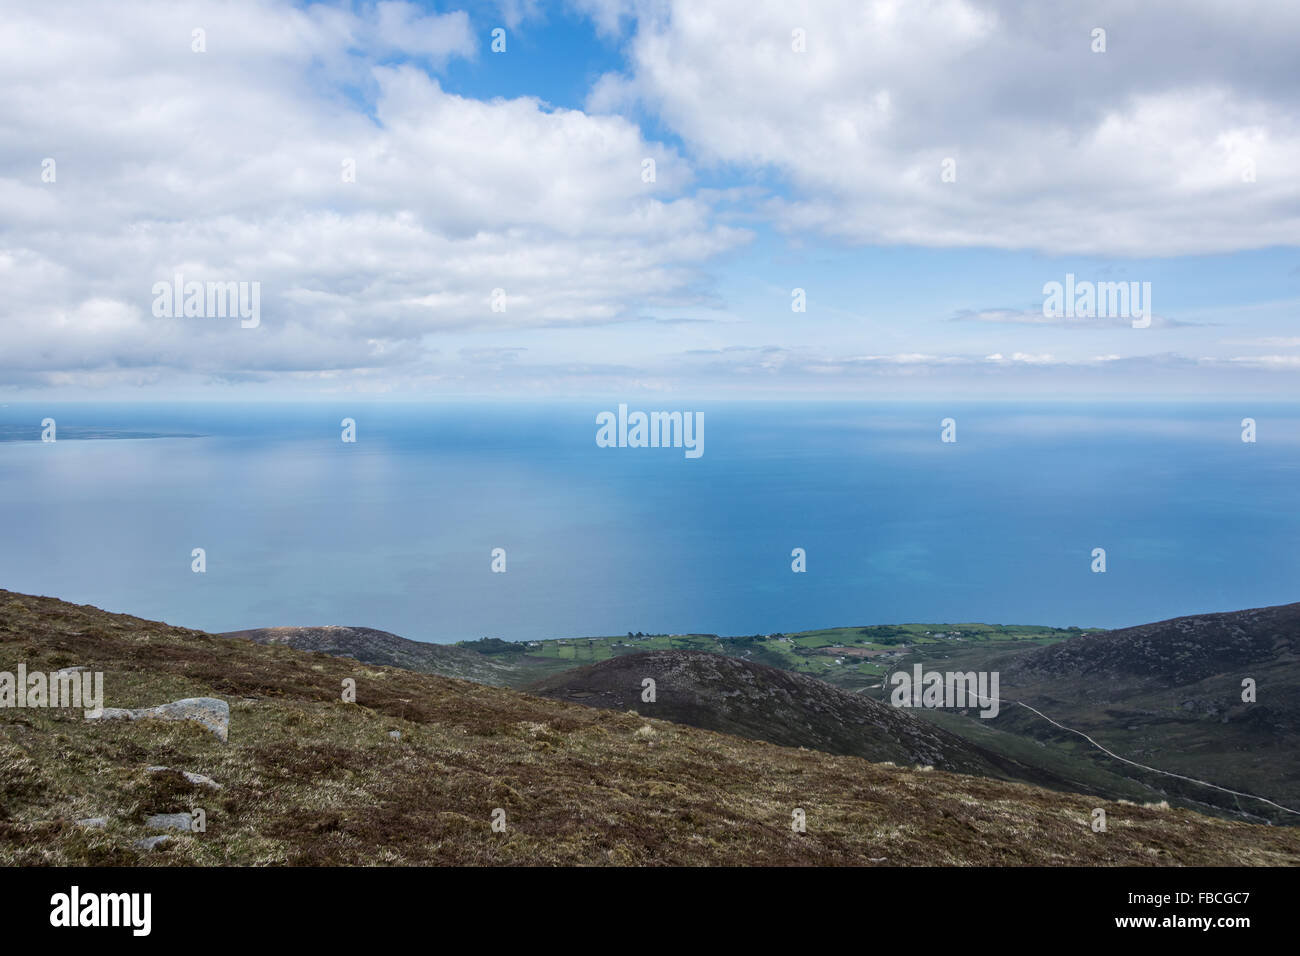 The view from Slieve Donard looking over the Irish sea to England. Stock Photo